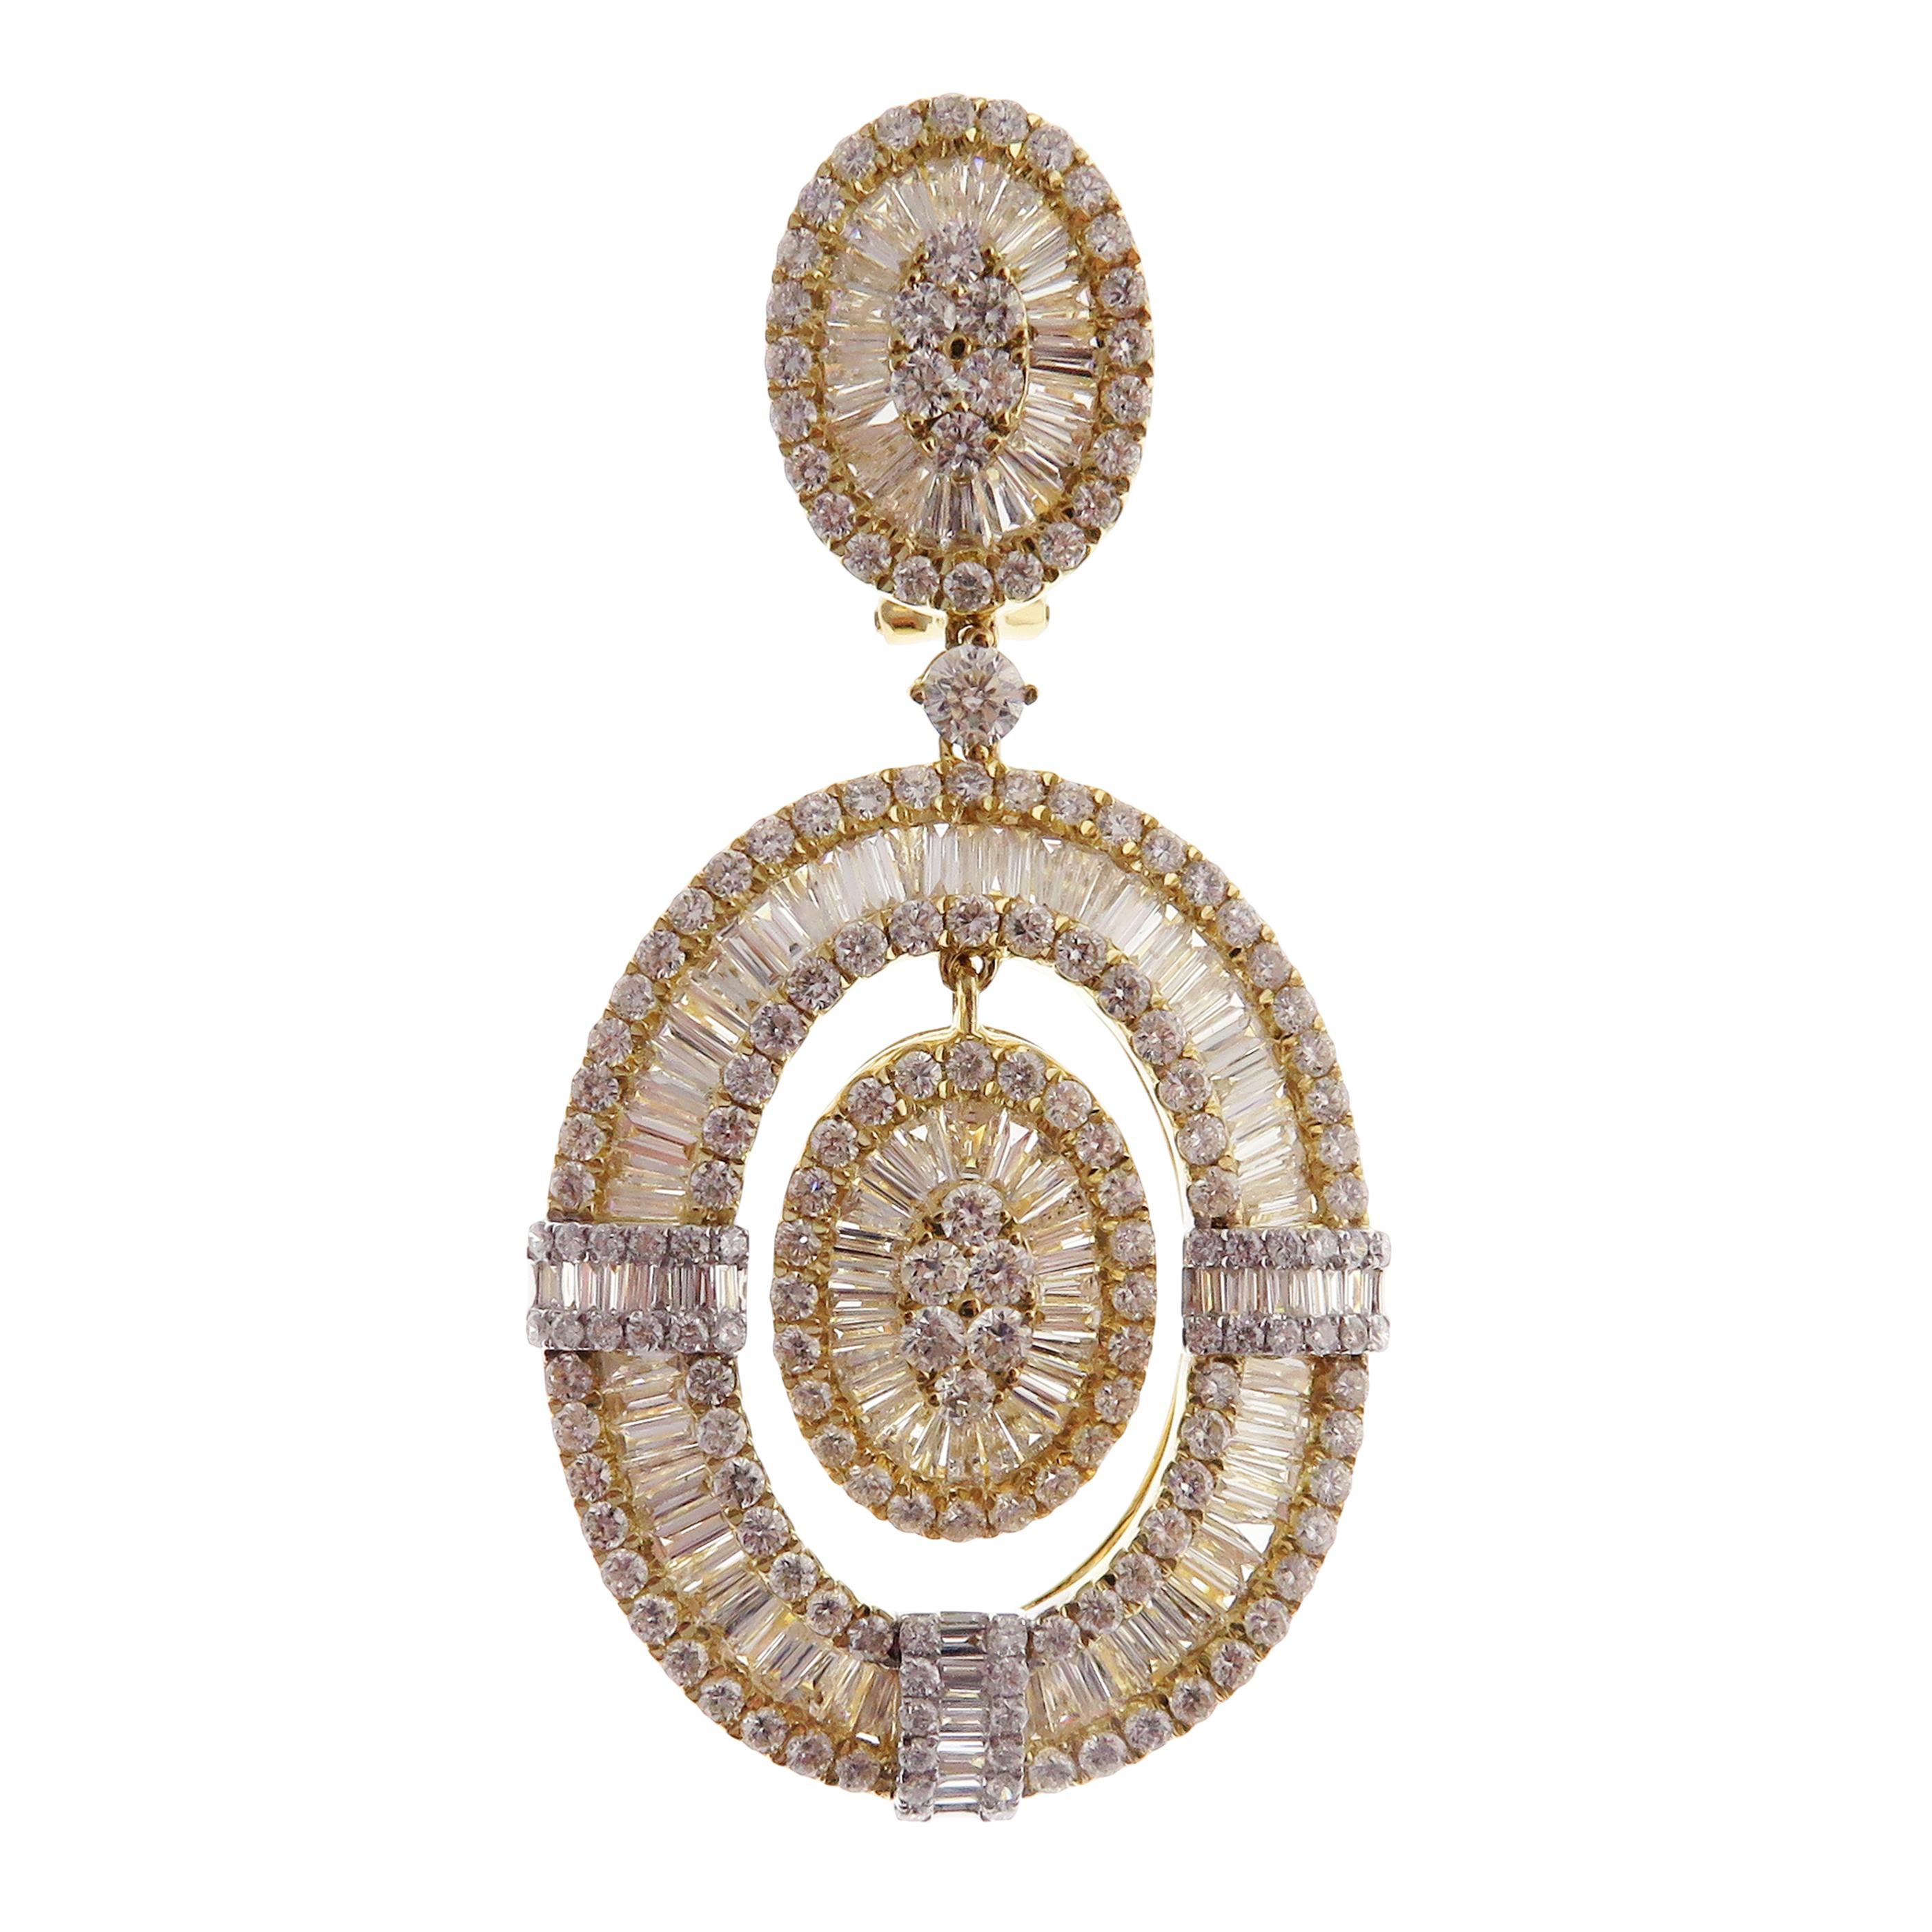 These modern oval baguette earrings are crafted in 18-karat yellow gold, weighing approximately 12.37 total carats of SI-V Quality white diamond. French Clip backing. Beautiful white gold accent.

Our Ballroom Collection feature earrings for those